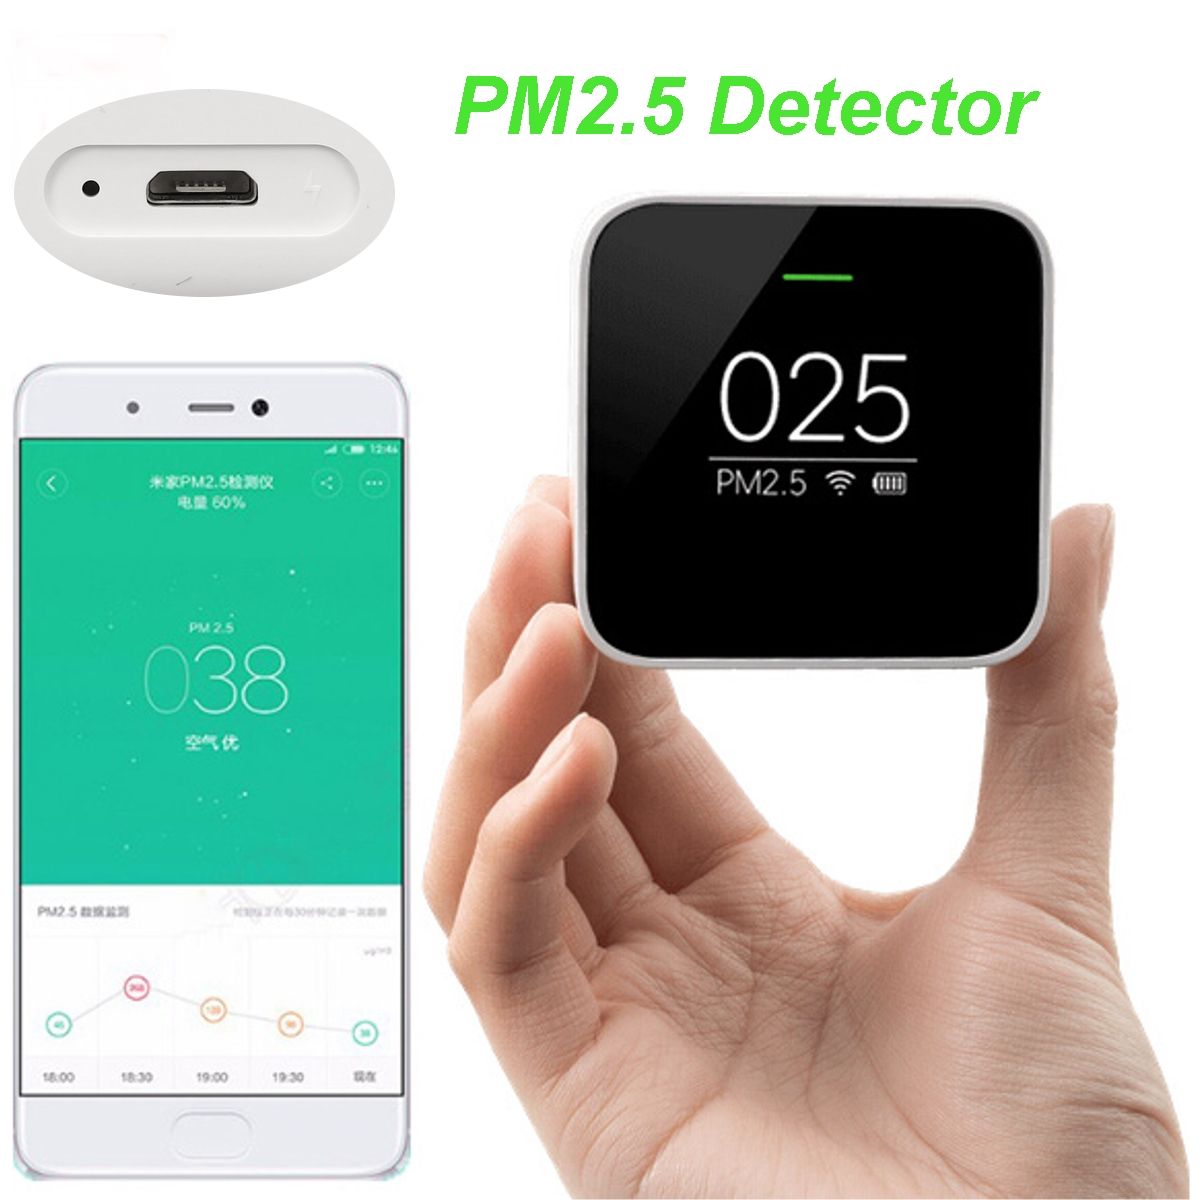 Original-Smart-PM25-Air-Detector-OLED-Screen-WiFi-24GHZ-Quality-Monitor-Detect-1626099